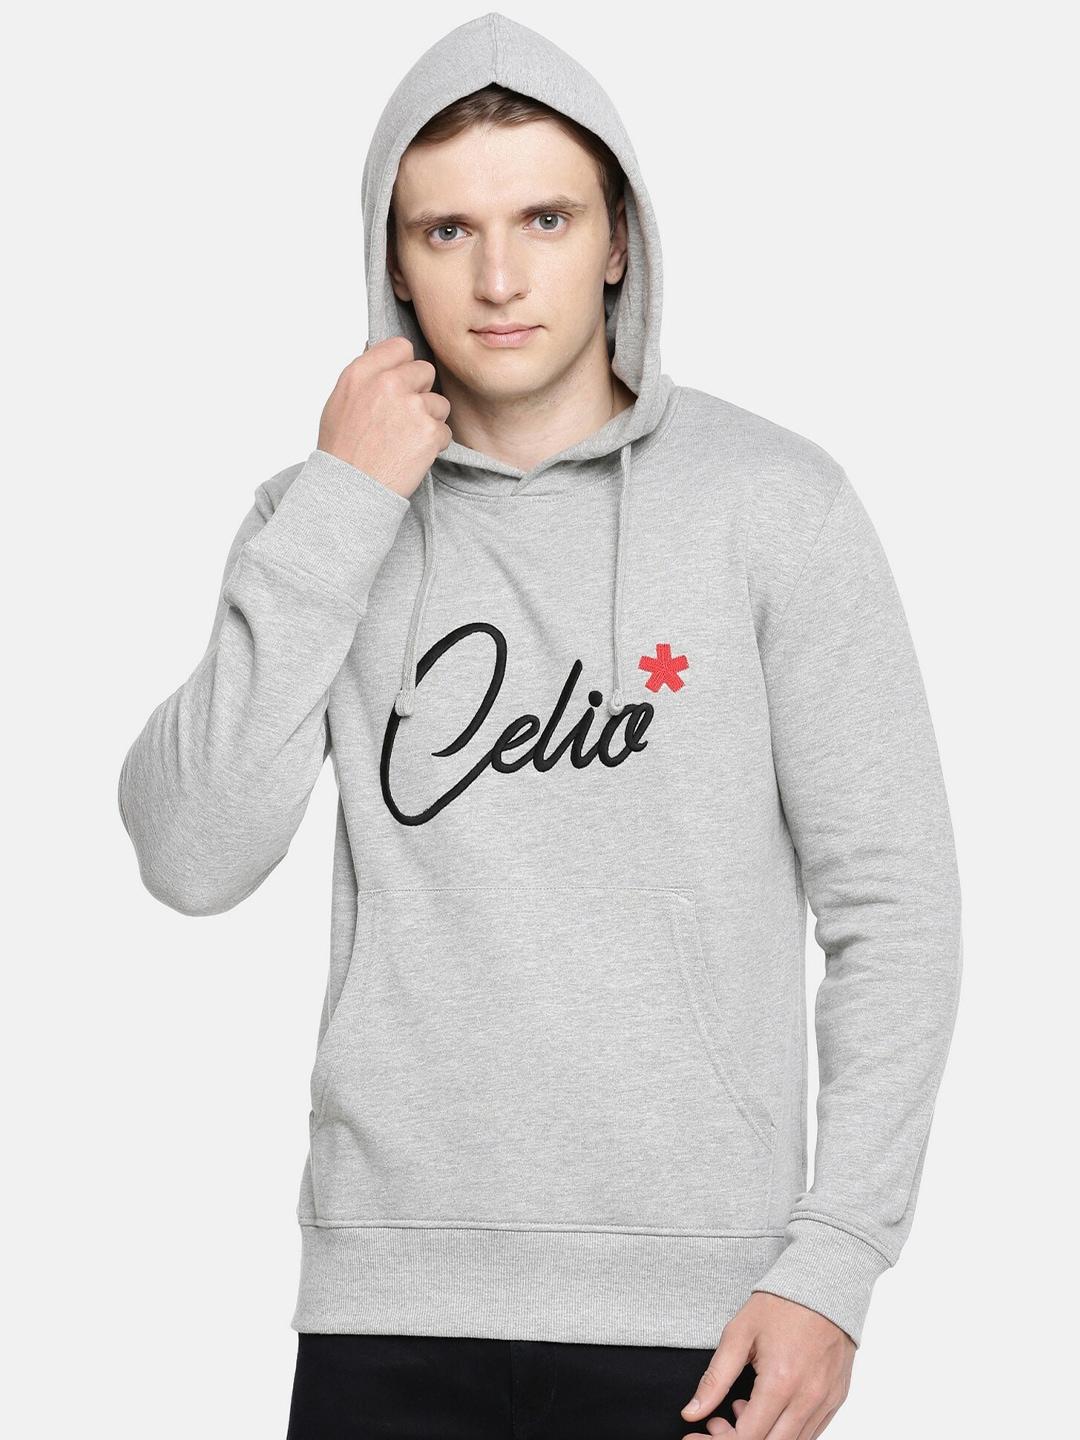 celio-typography-printed-hooded-pullover